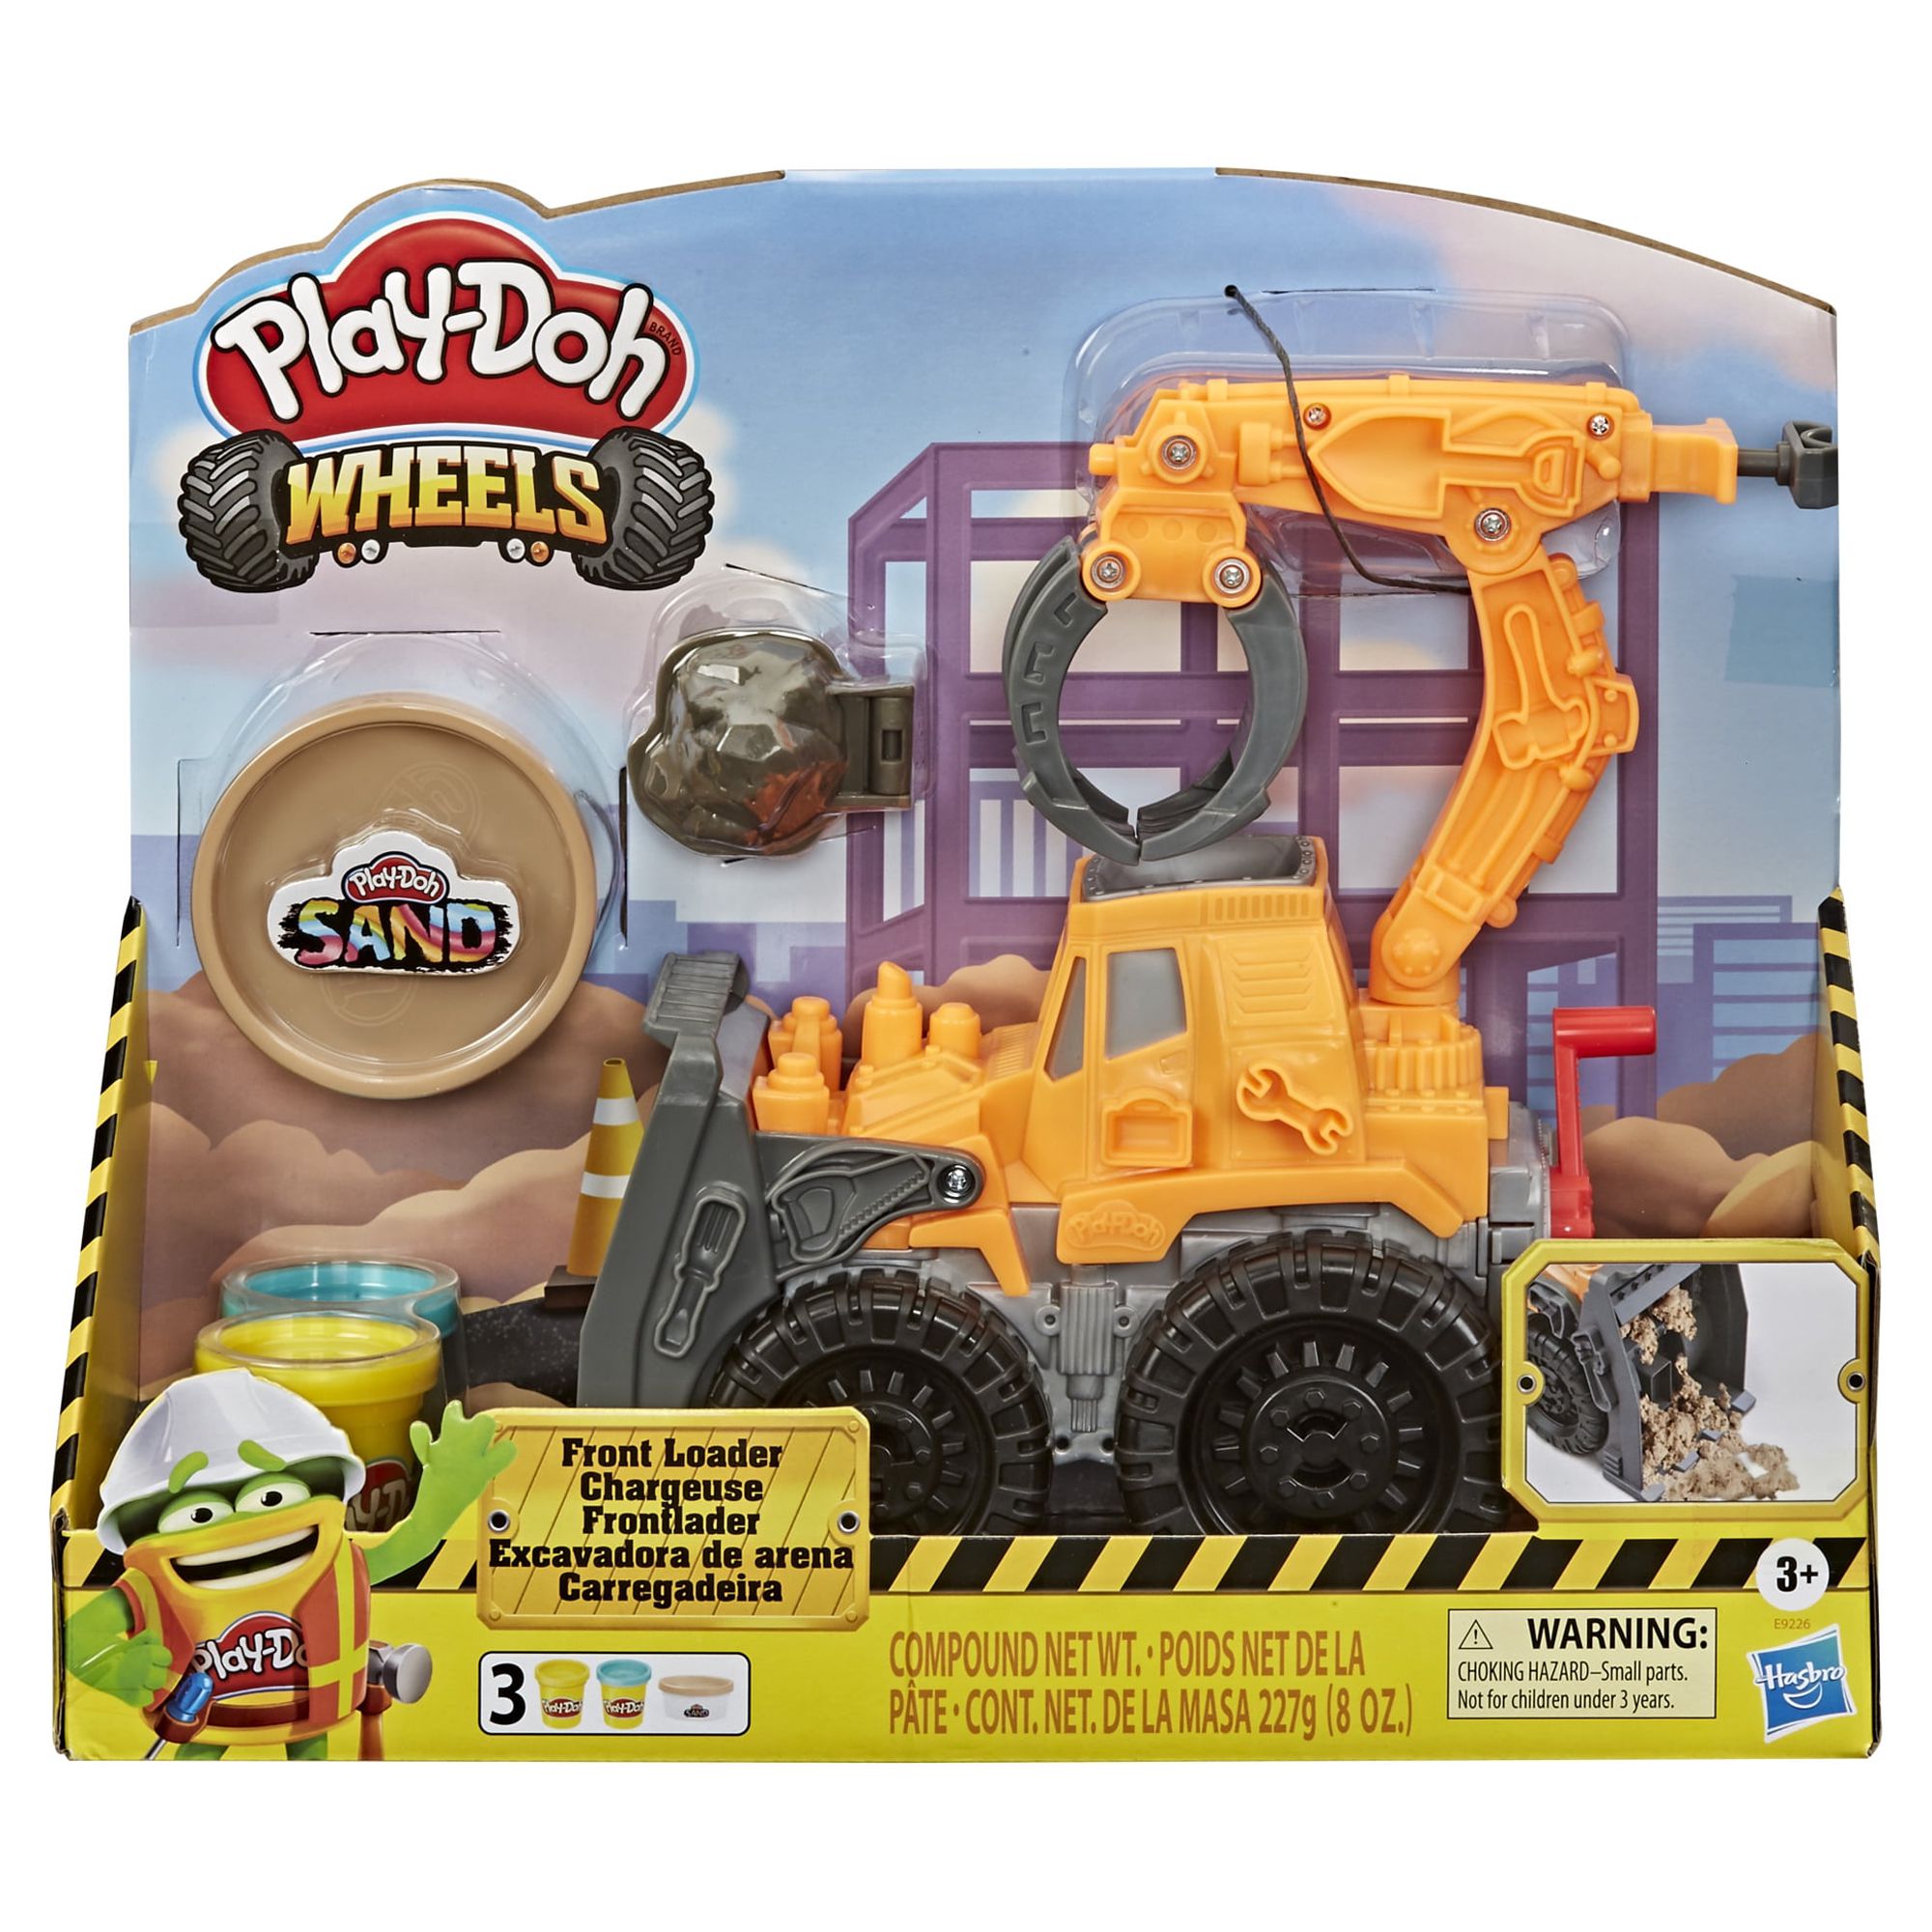 Play-Doh Wheels Front Loader Construction Set Toys - image 1 of 9